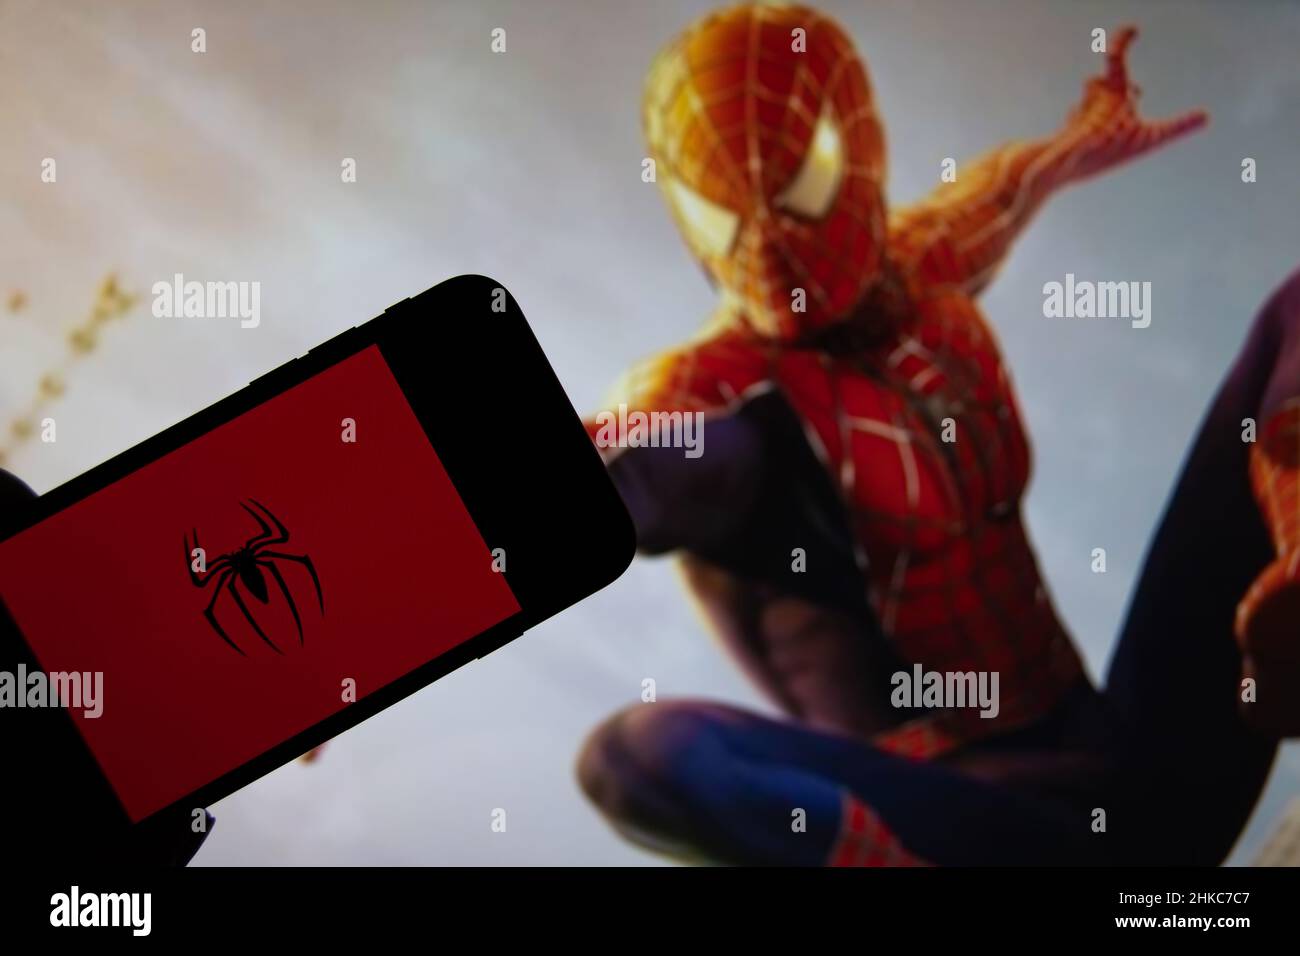 Rheinbach, Germany 15 October 2021,   The Spiderman logo on the display of a smartphone in front of a scene from a Spiderman film on TV Stock Photo